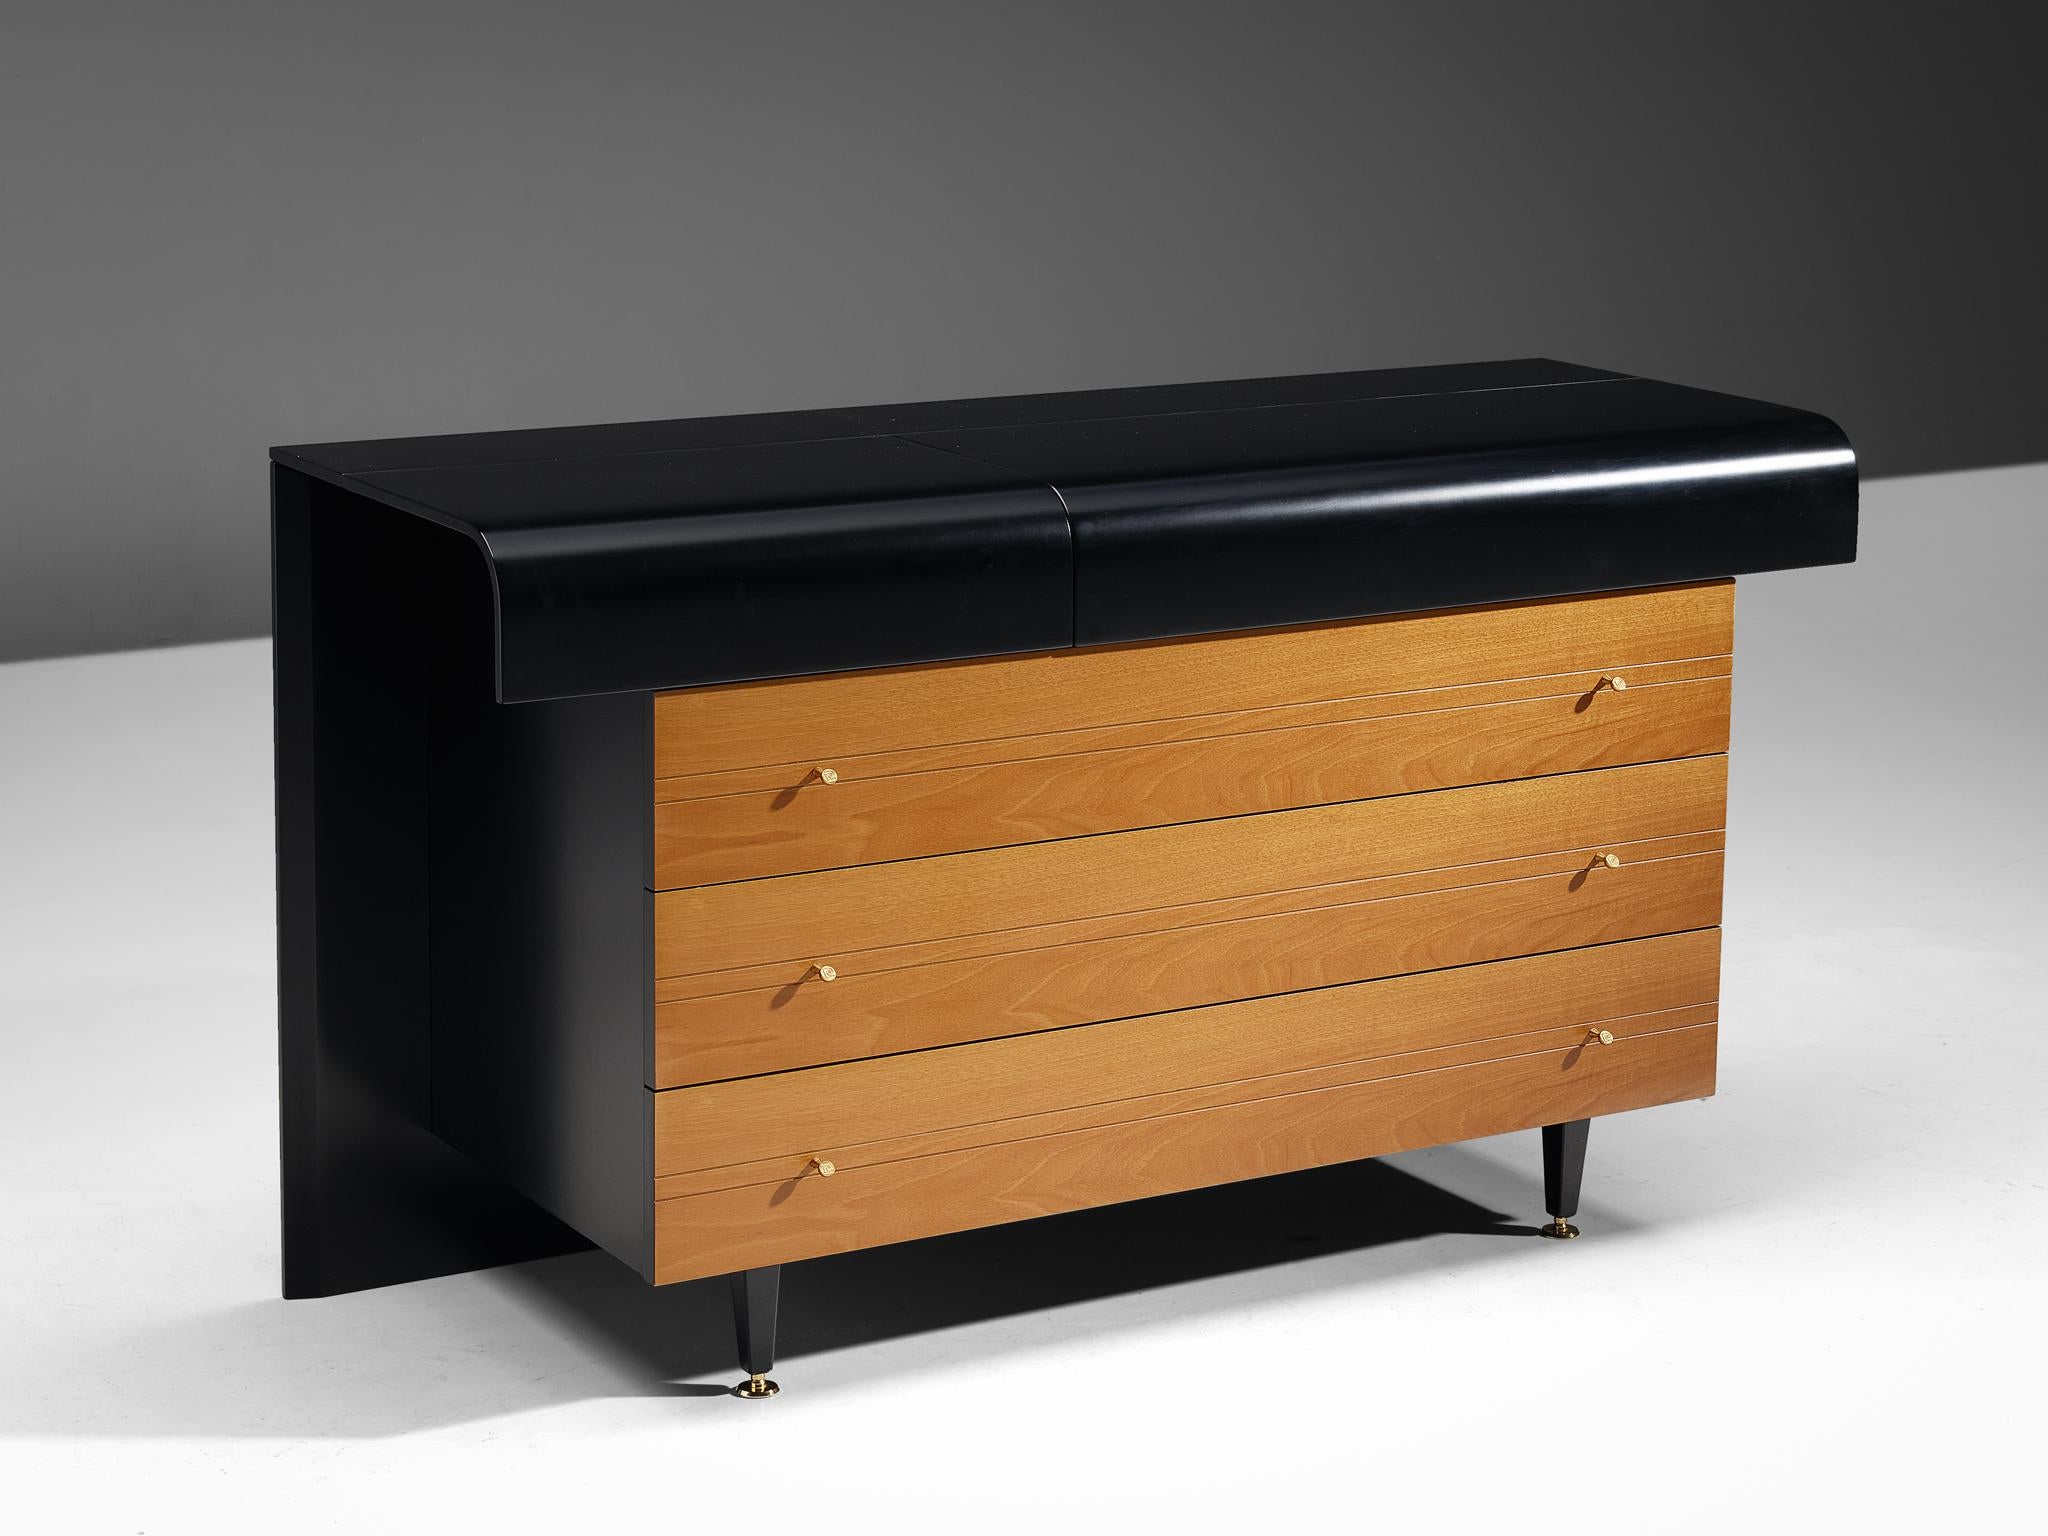 Pierre Cardin, chest of drawers, black lacquered wood, walnut, brass, France, 1970s

Chest of drawers designed by the groundbreaking fashion designer Pierre Cardin (1922 - 2020). Pierre Cardin was a world famous fashion designer, but also enjoyed